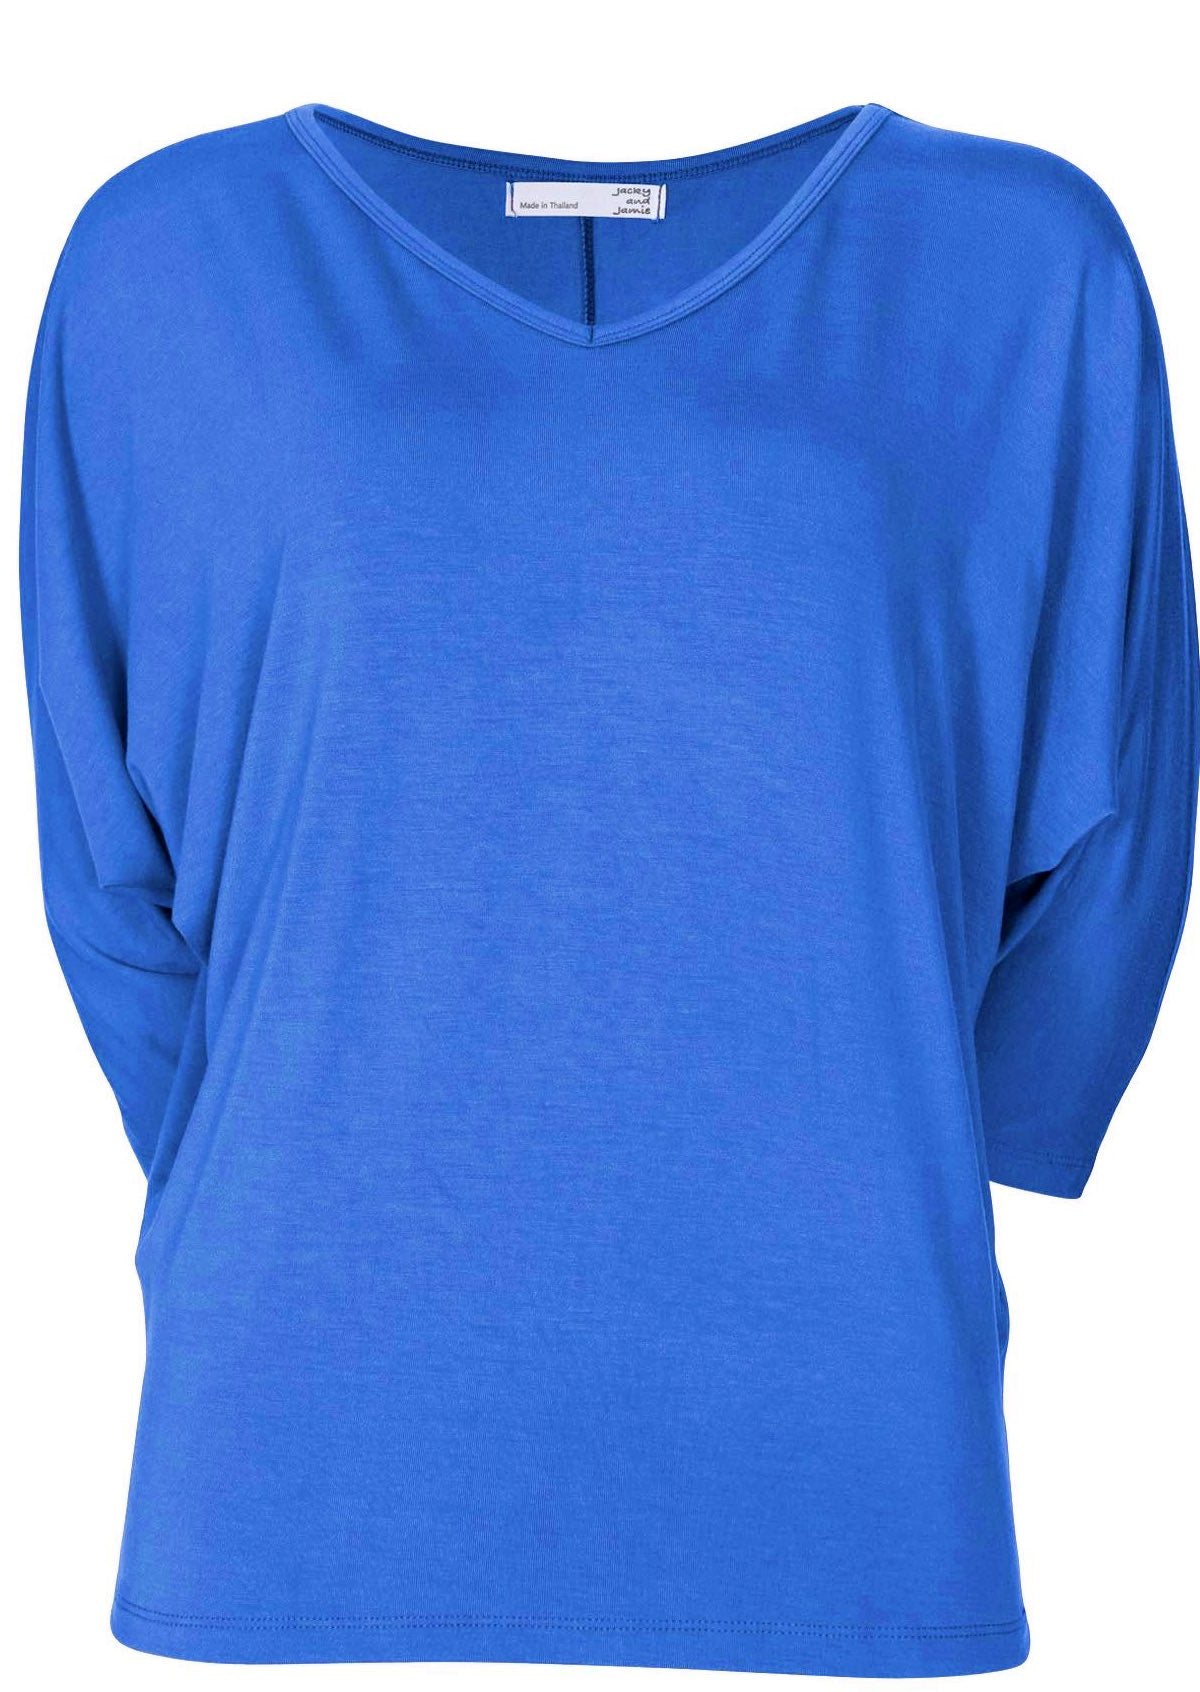 Front view of women's 3/4 sleeve rayon batwing v-neck blue top.